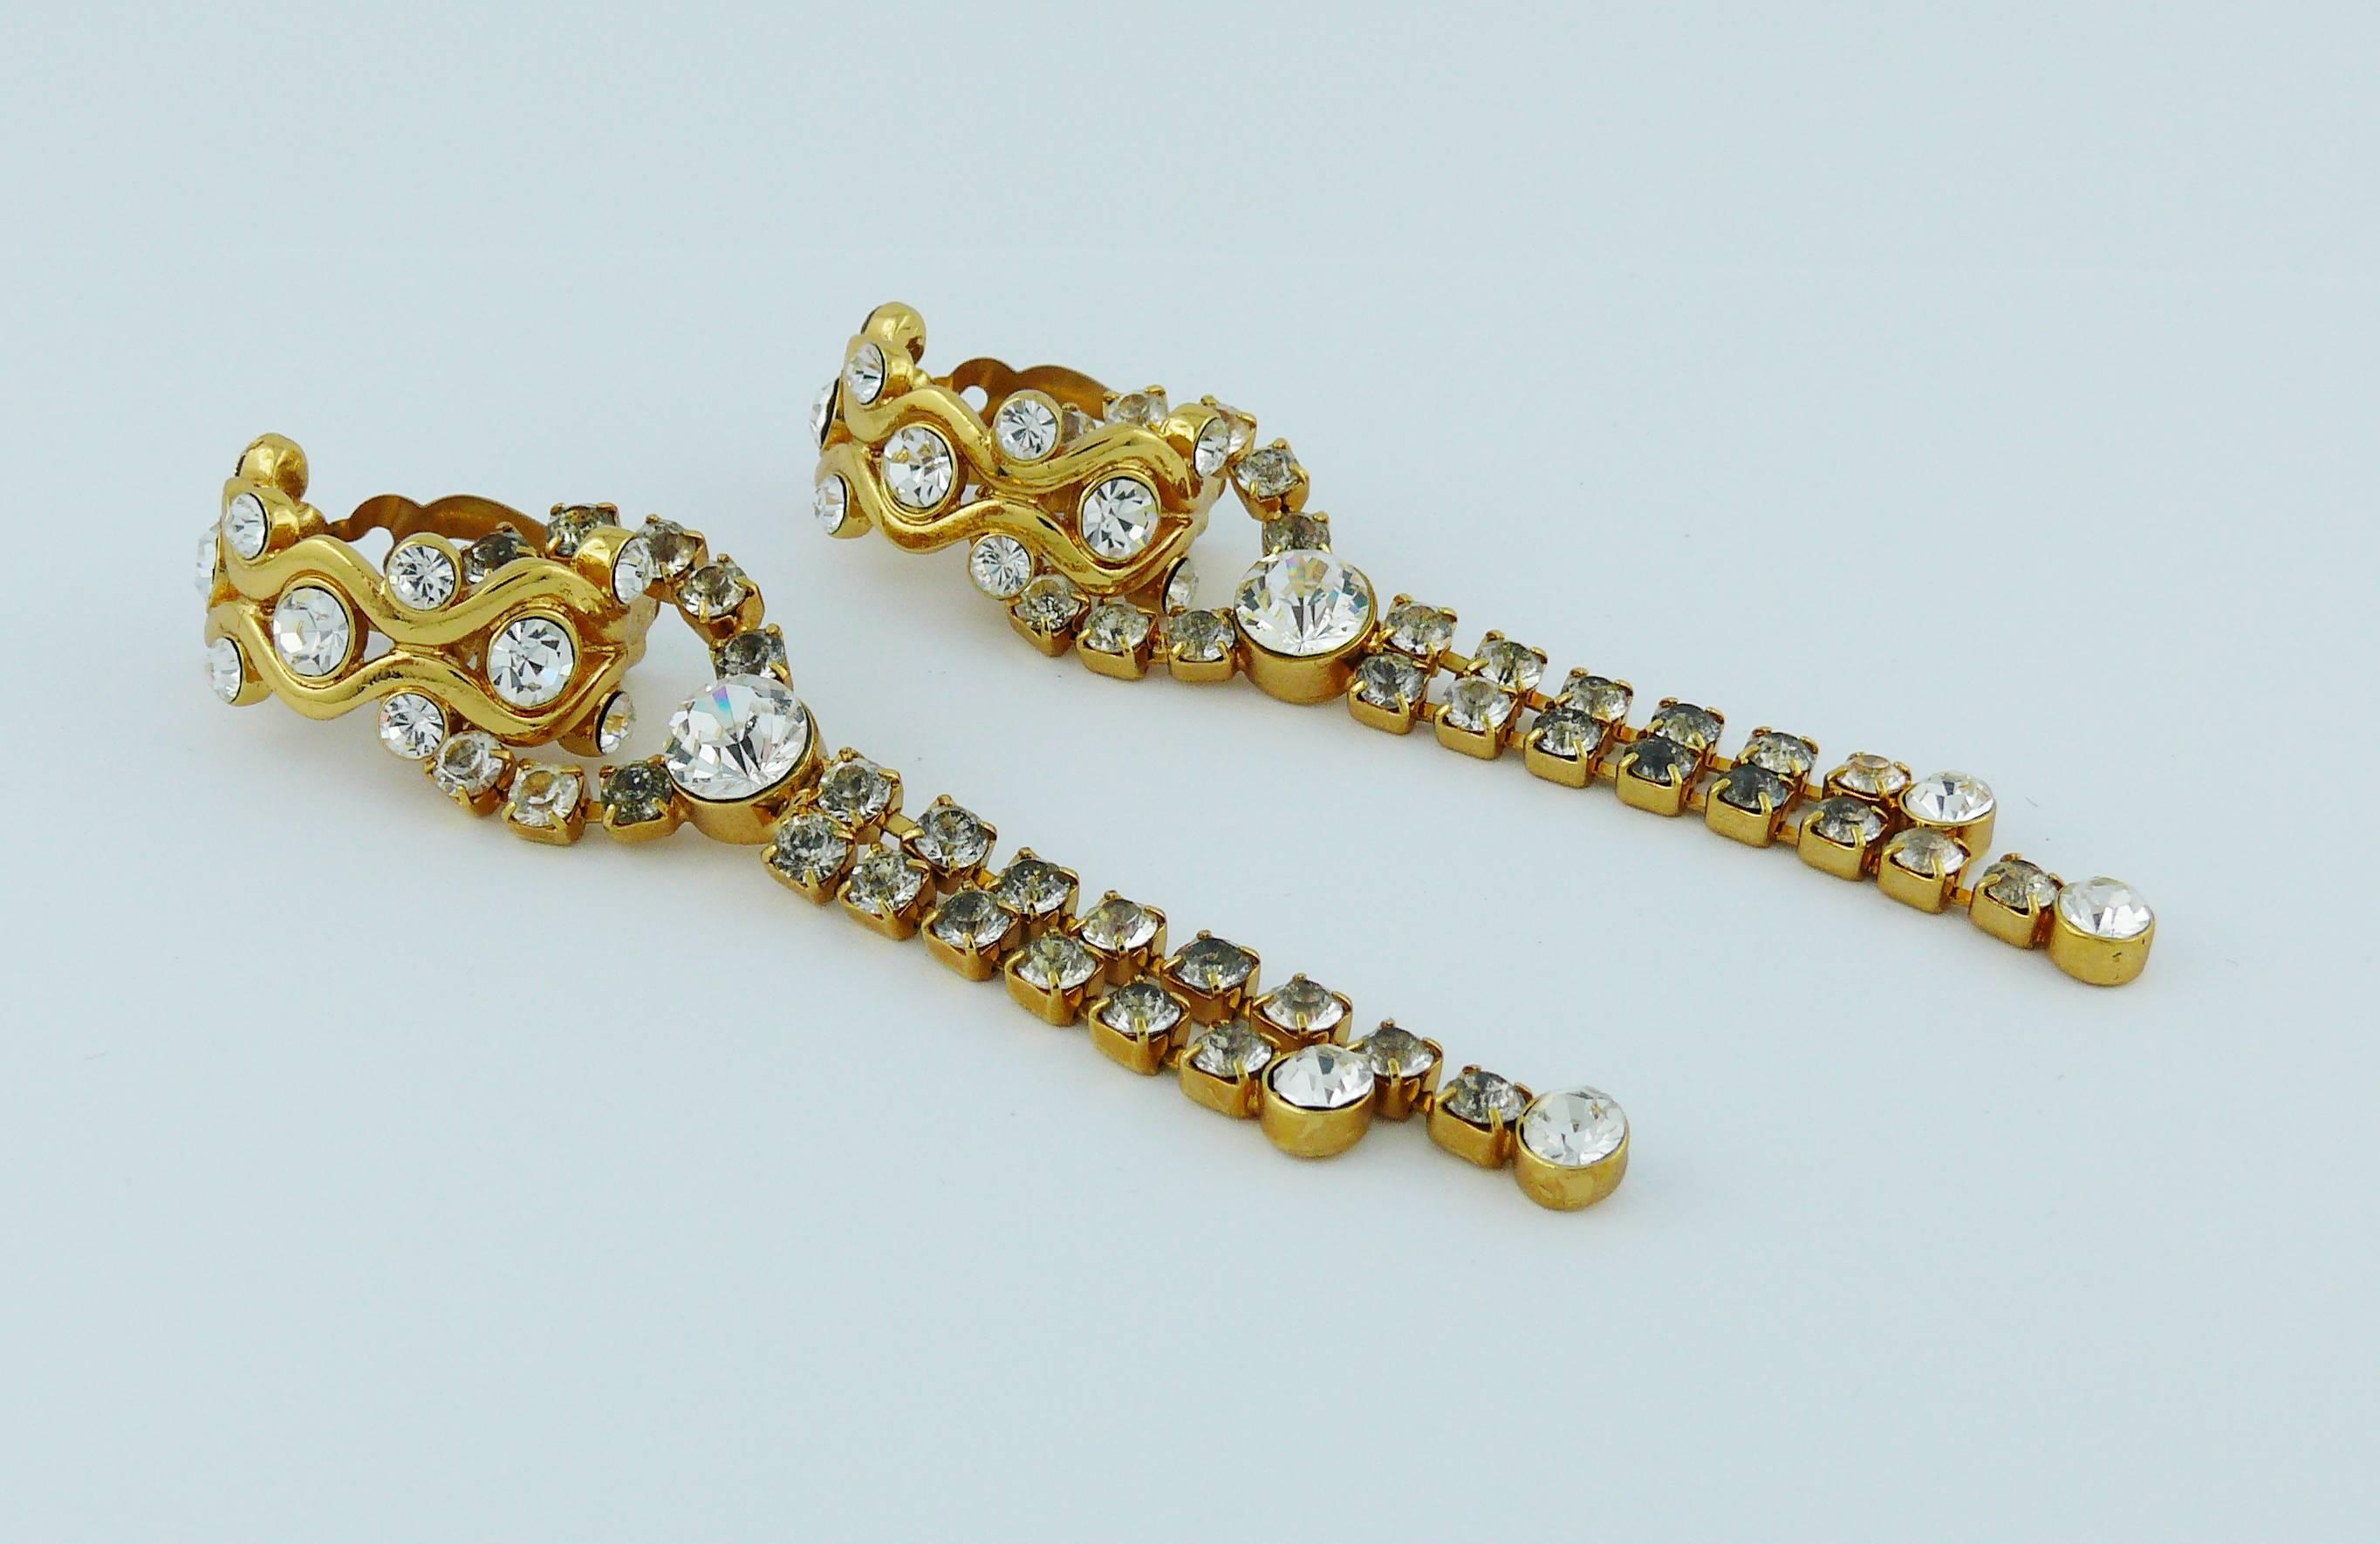 YVES SAINT LAURENT vintage gold toned two-way dangling earrings (clip-on) embellished with clear crystals.

Embossed YSL Made in France.

Indicative measurements : max. length approx. 9.5 cm (3.74 inches) / max. width approx. 2 cm (0.79